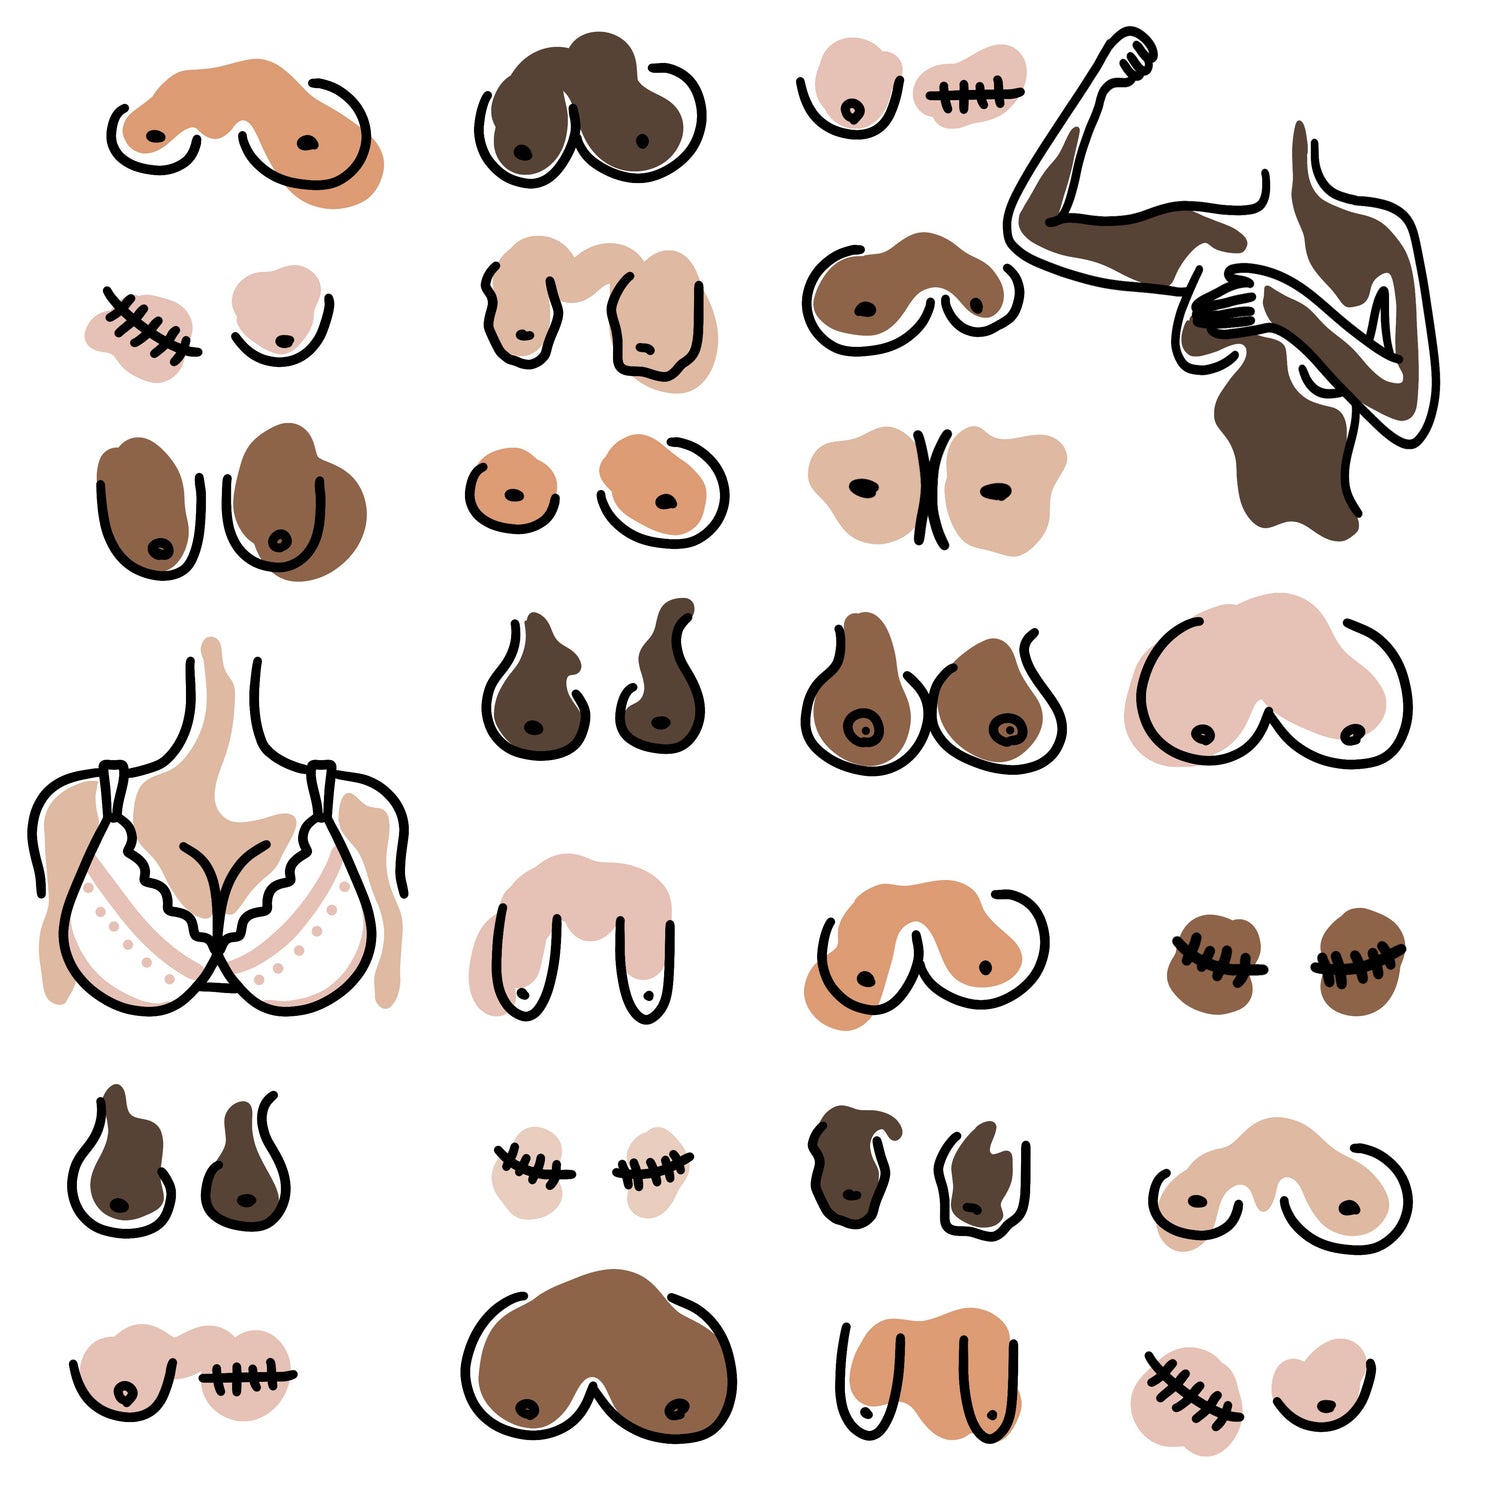 Big Boobs With Pointed Pierced Nipples SVG | SVGed